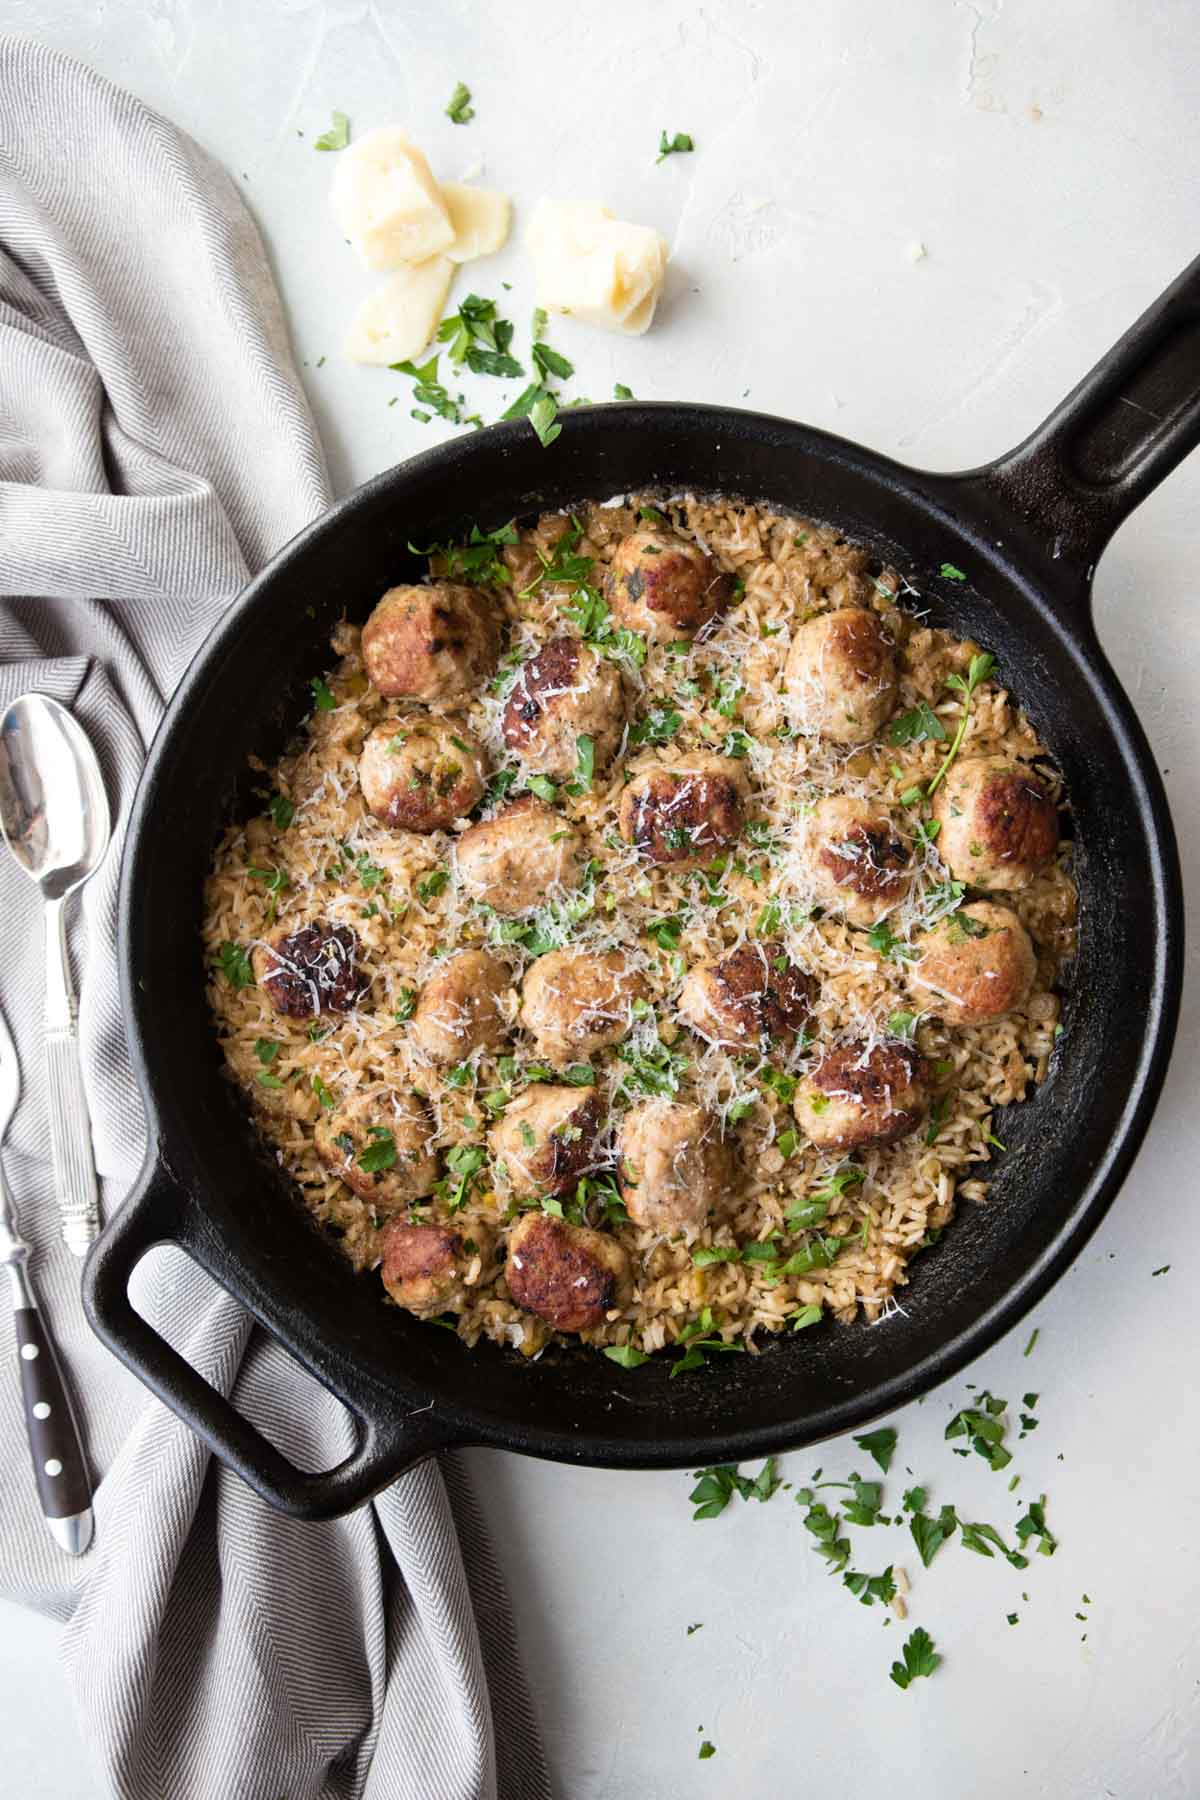 turkey meatballs and brown rice in a black cast iron skillet